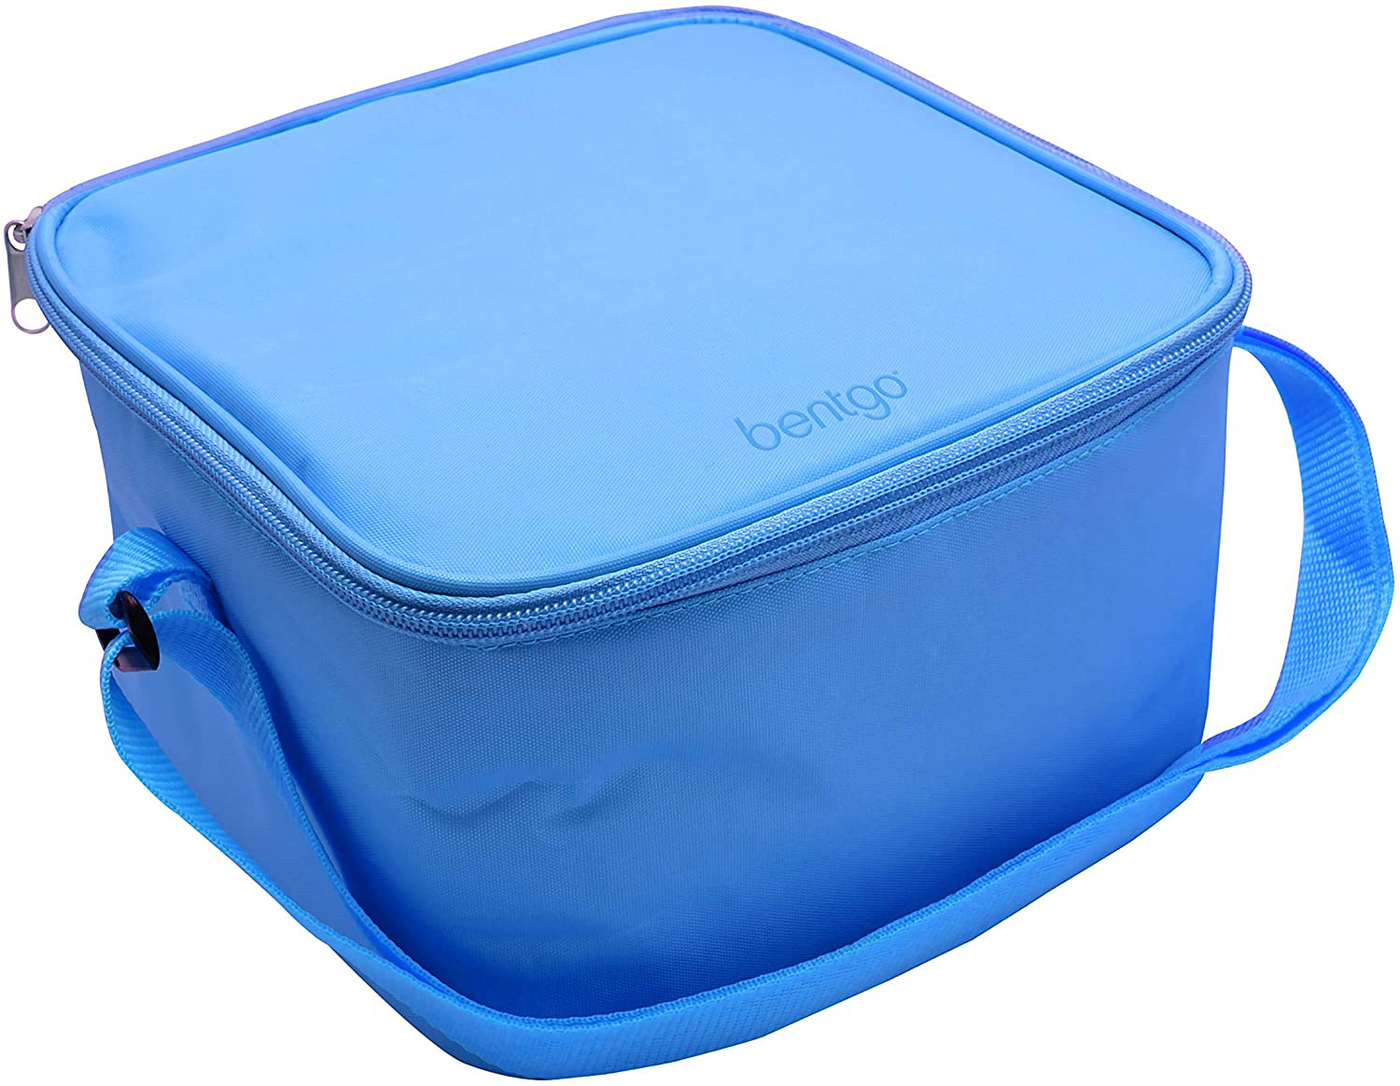 Bentgo Classic Bag (Blue) - Insulated Lunch Bag Keeps Food Cold On the Go - Fits the Bentgo Classic Lunch Box, Bentgo Cup, Bentgo Sauce Dippers and an Ice Pack - Works With Other Food Storage Boxes